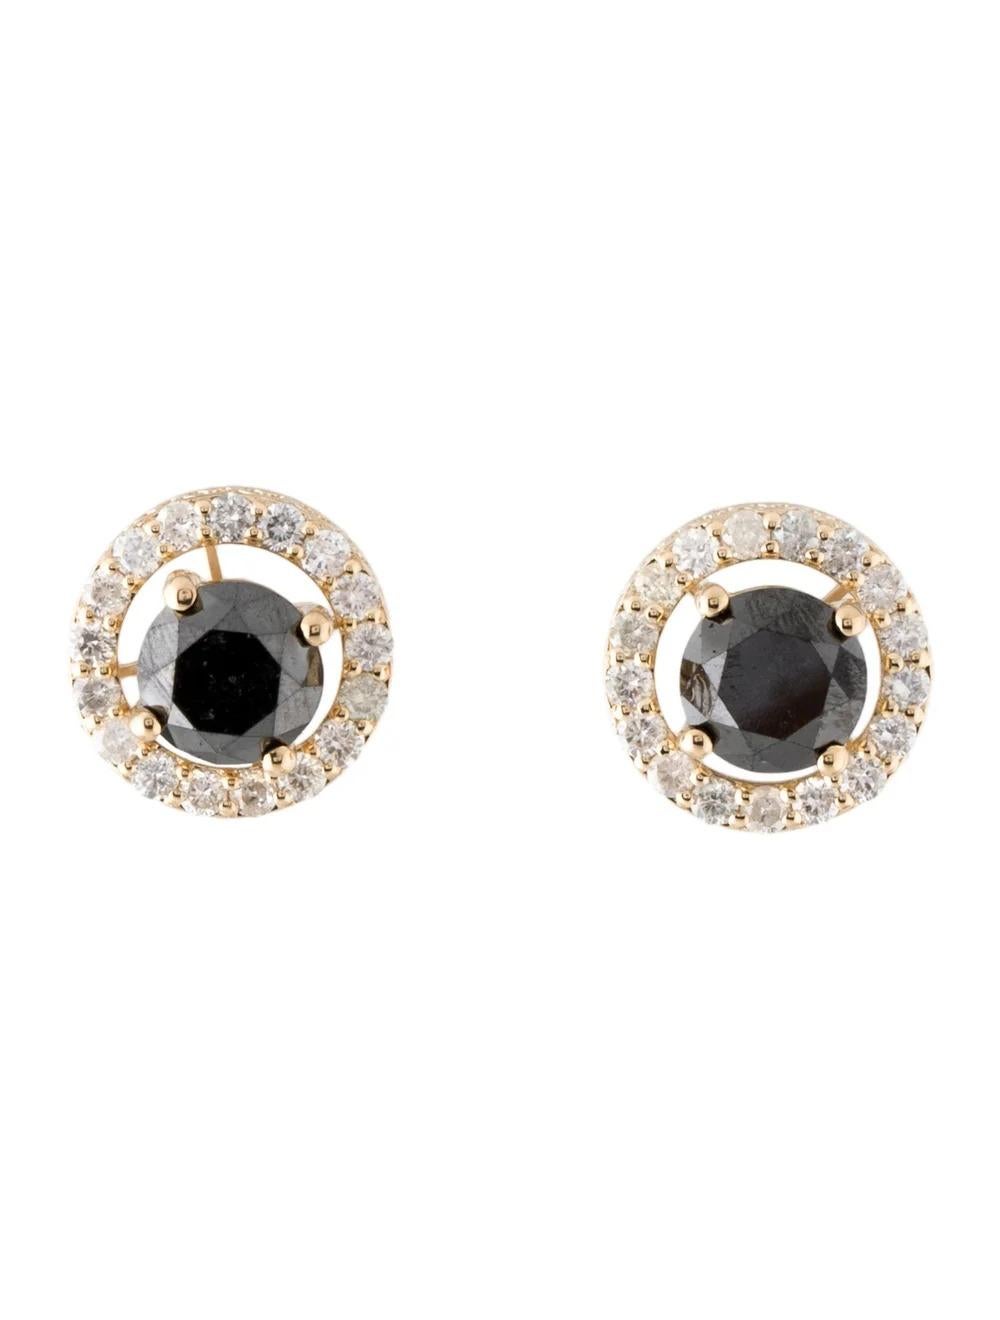 This striking pair of 14K Yellow Gold Diamond Stud Earrings exudes timeless elegance and sophistication.

Specifications:

* Metal Type: 14K Yellow Gold
* Estimated item measurements: Length: 0.5